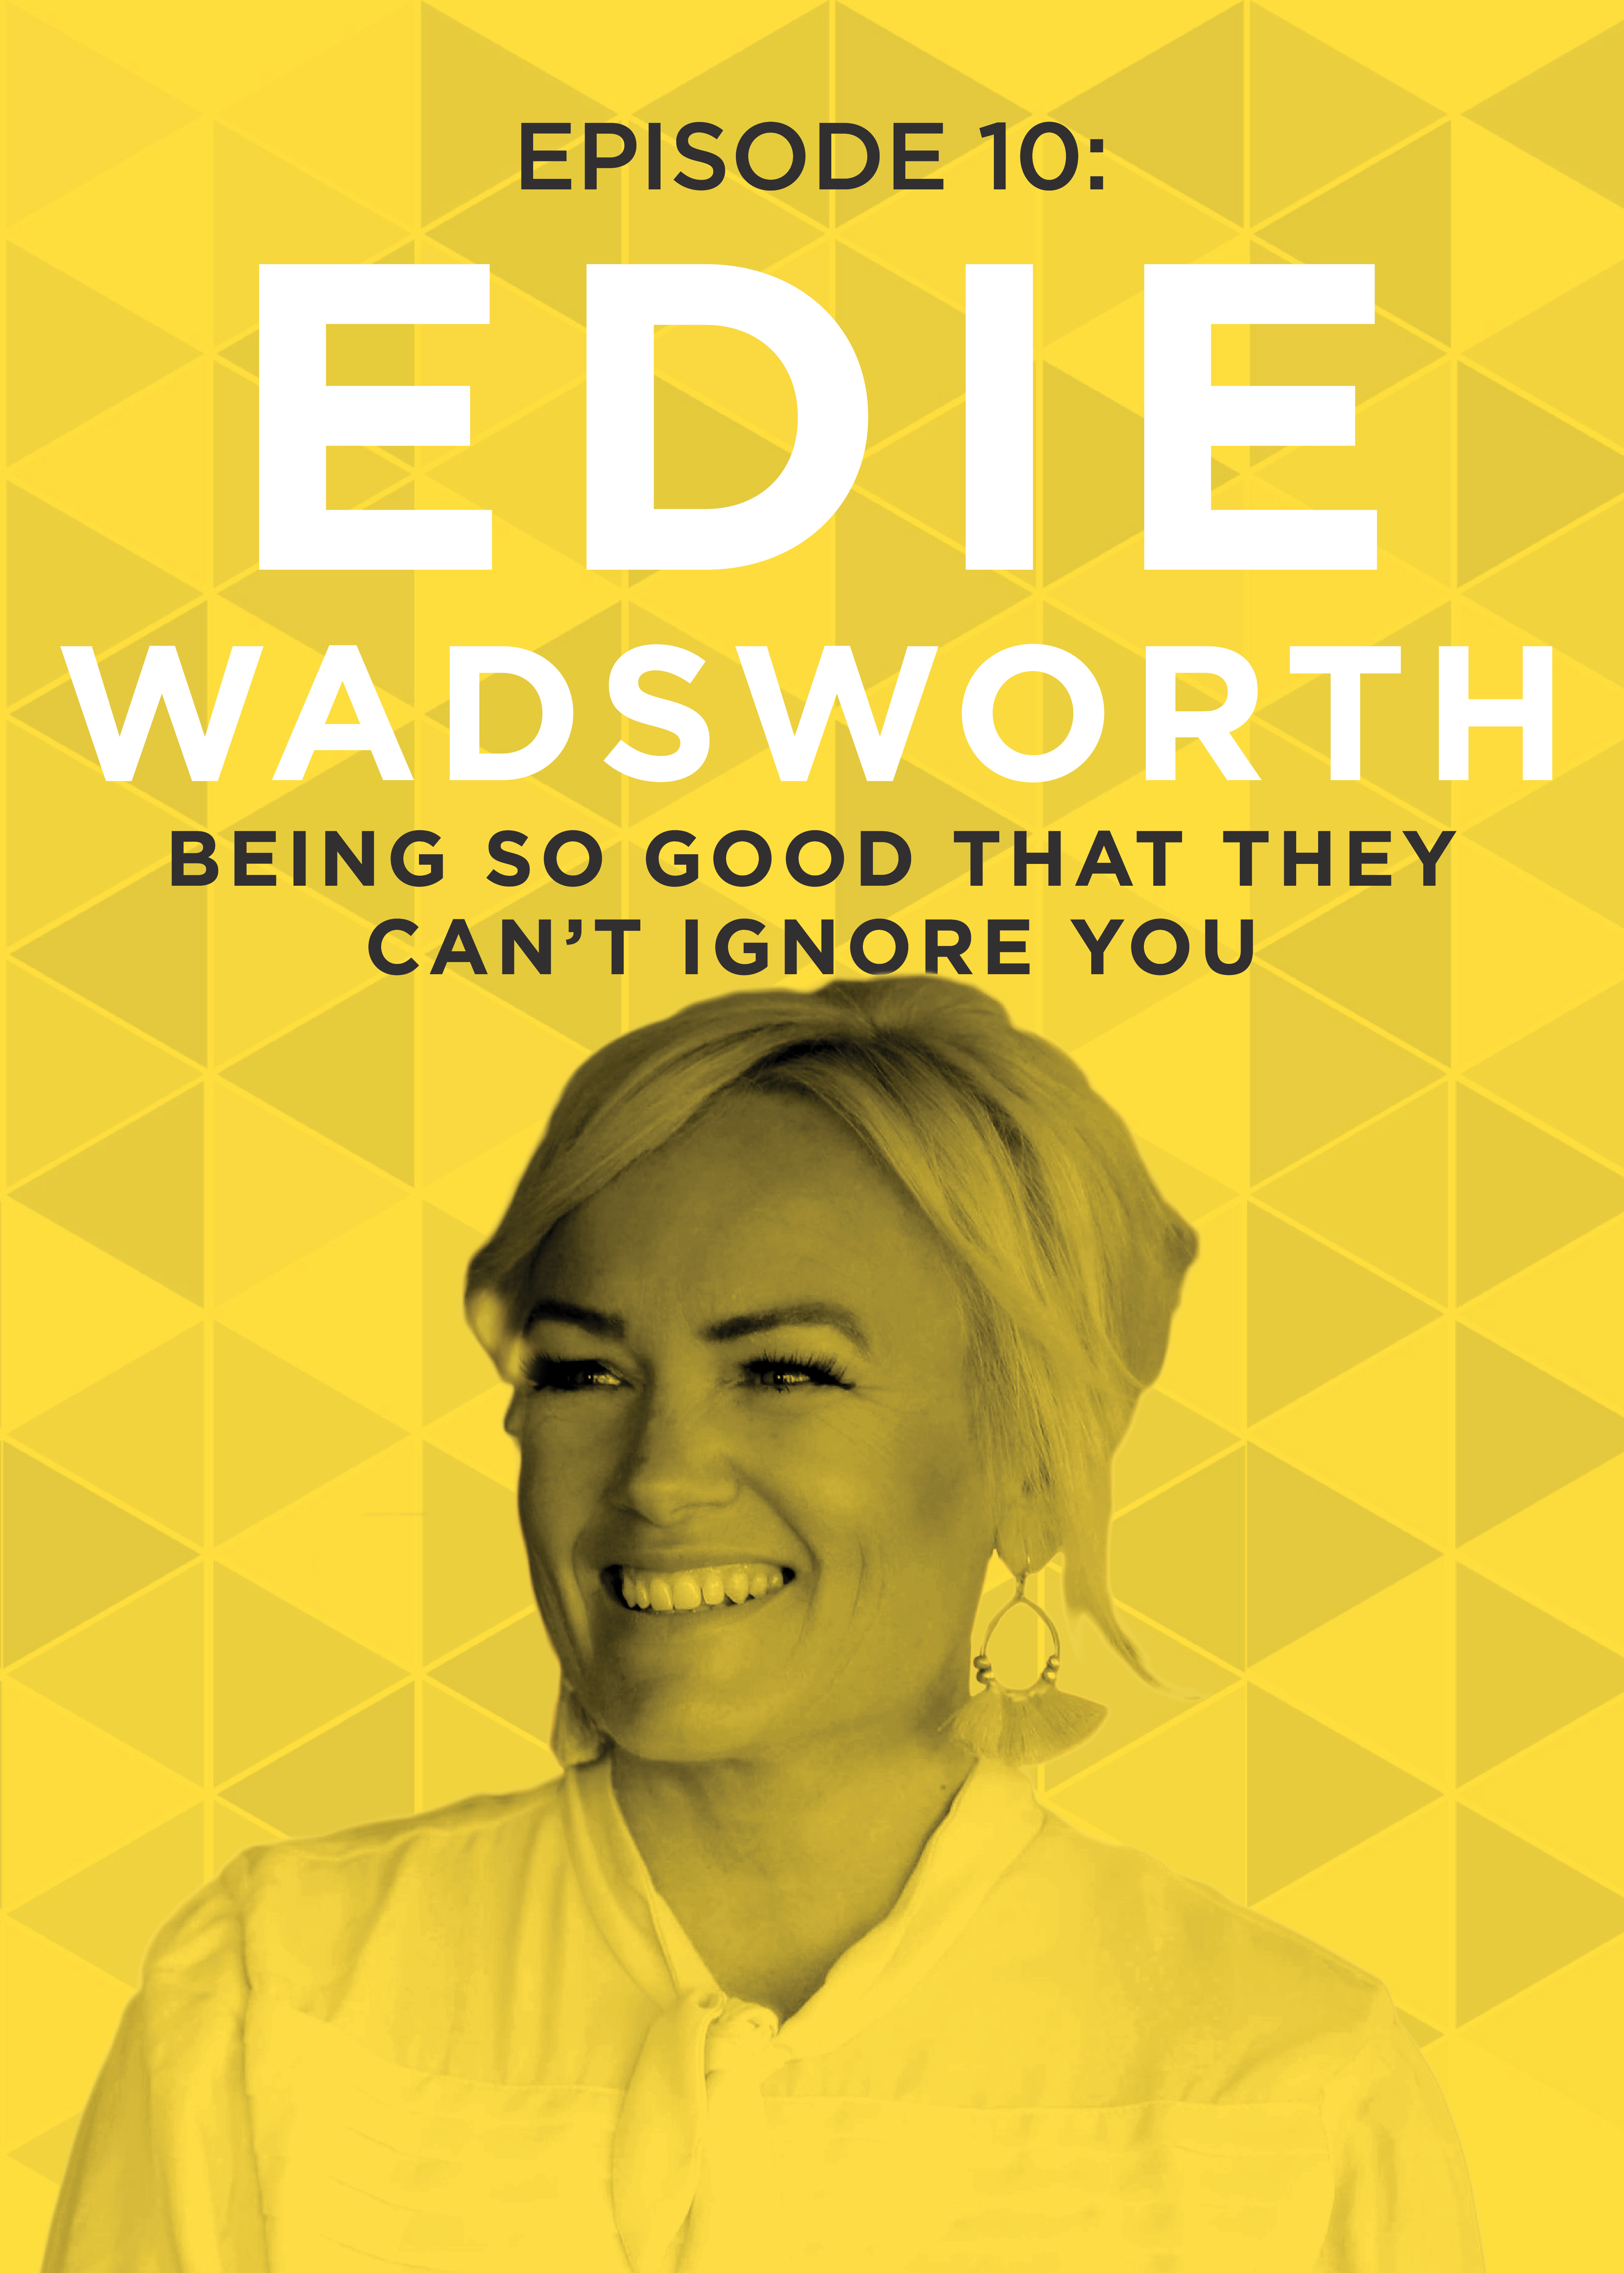 One way to move past rejection is to become so good that they just can’t say no! Edie Wadsworth figured this out, and used her determination to flourish in two impressive careers. Learn how to overcome obstacles, switch paths, and Do it Scared!